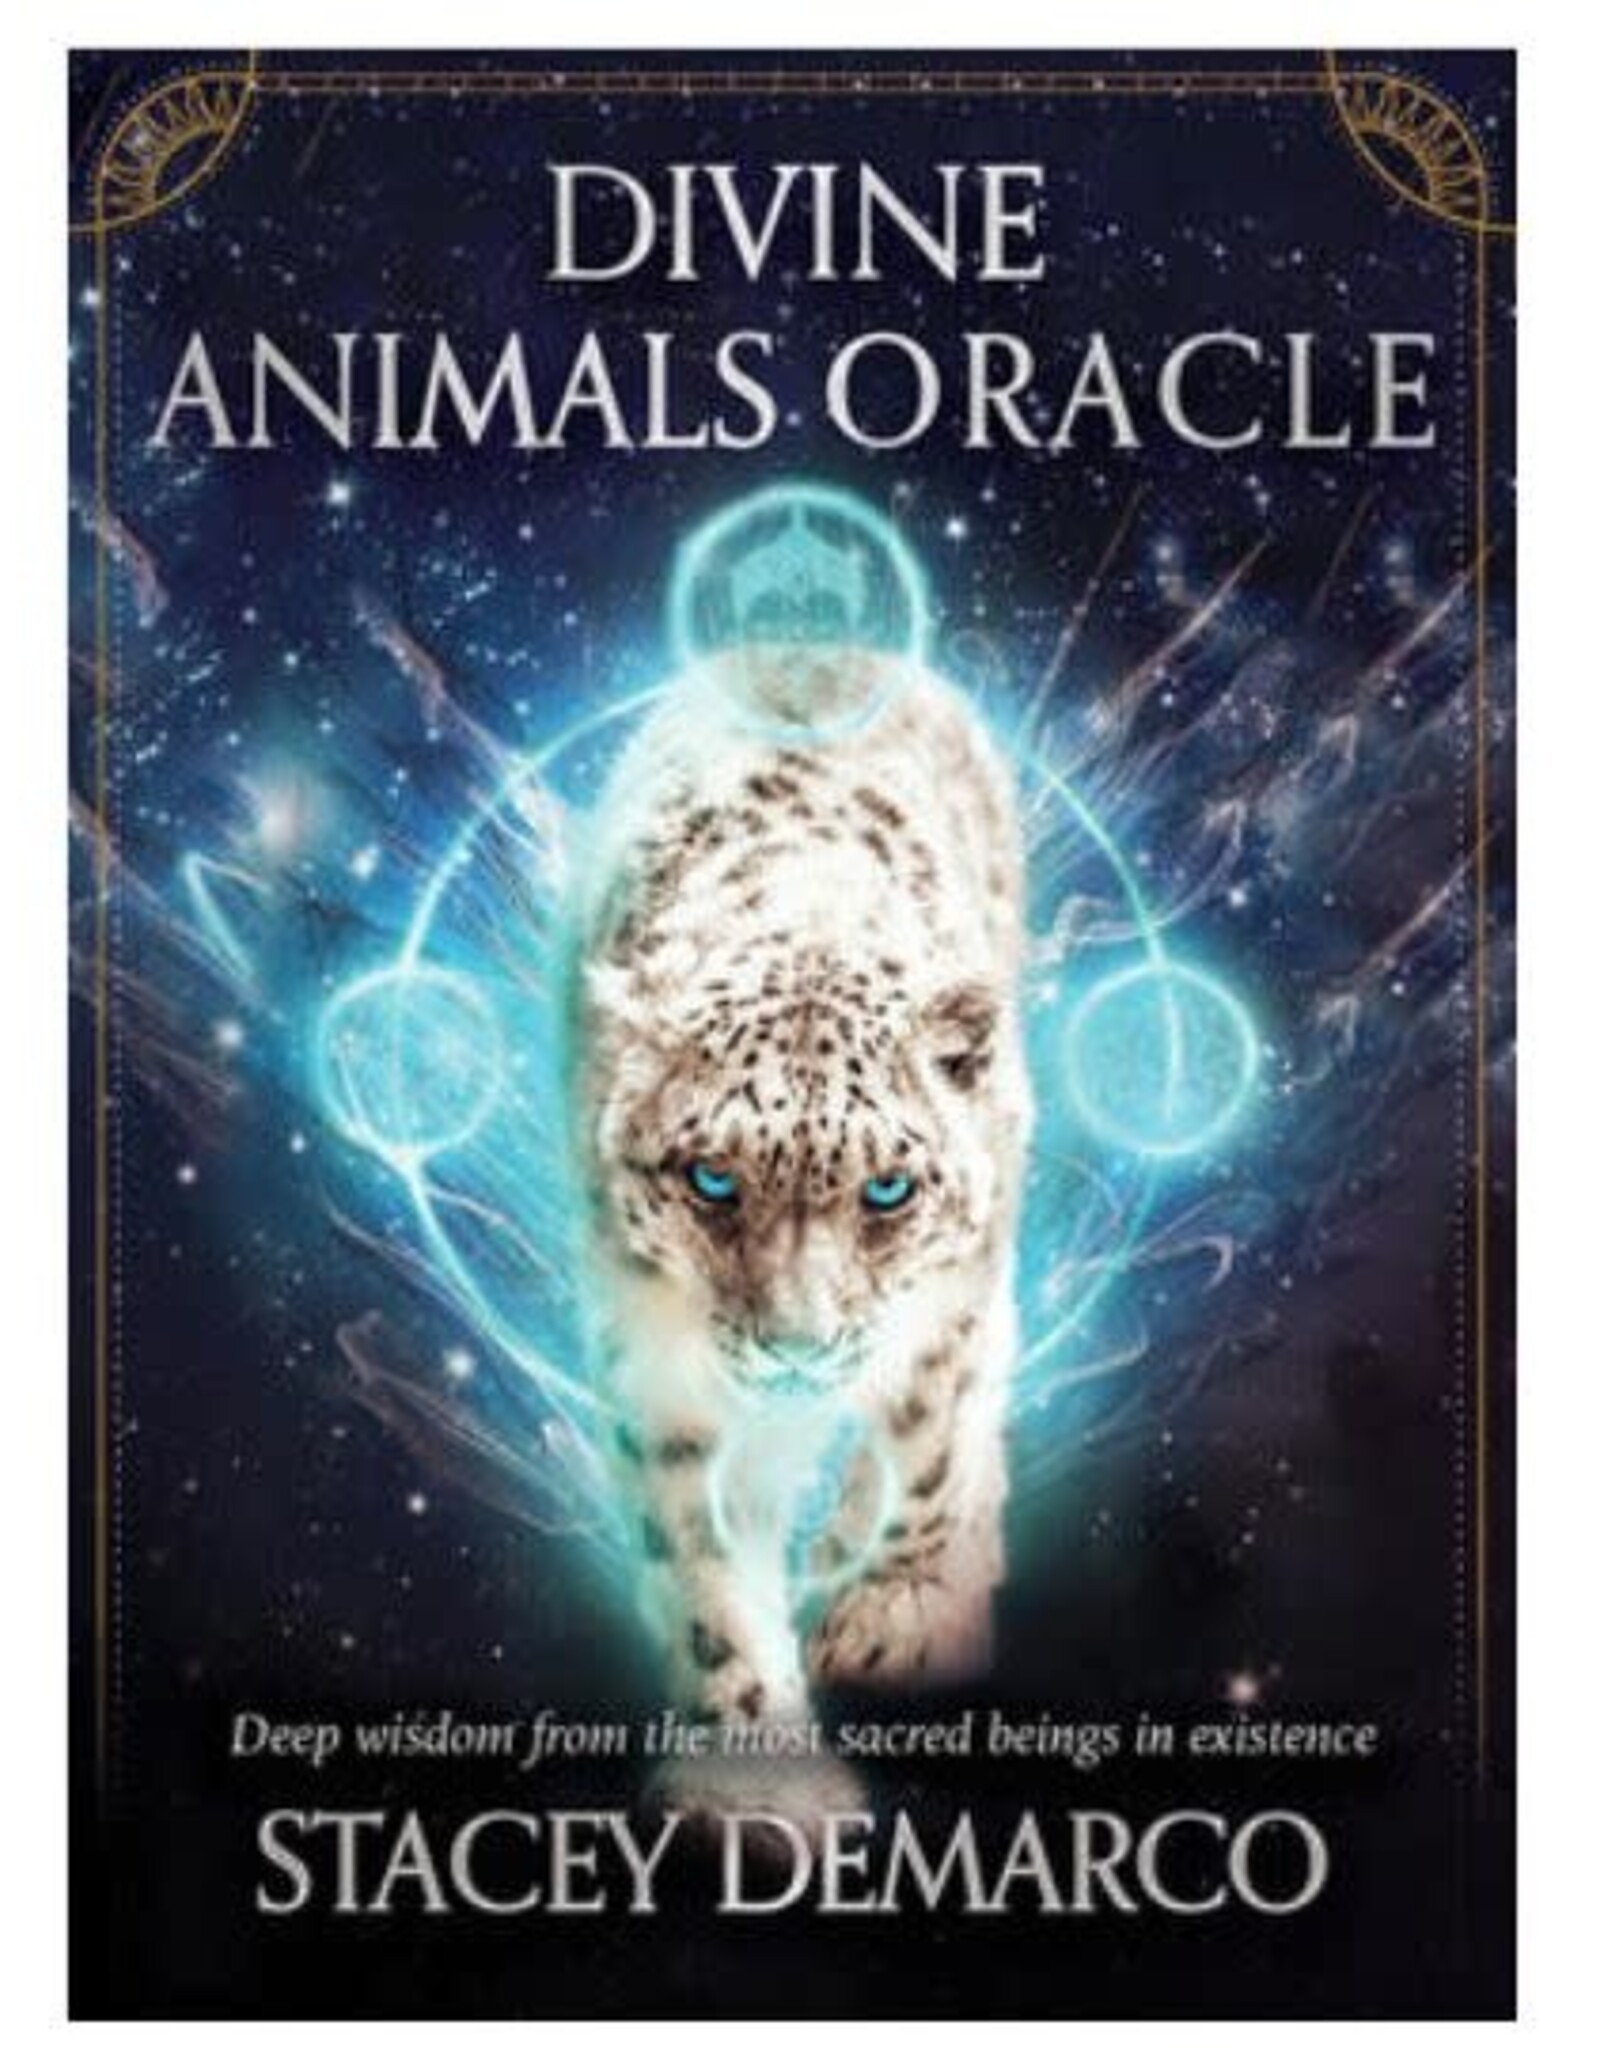 Stacey Demarco Divine Animals Oracle by Stacey Demarco